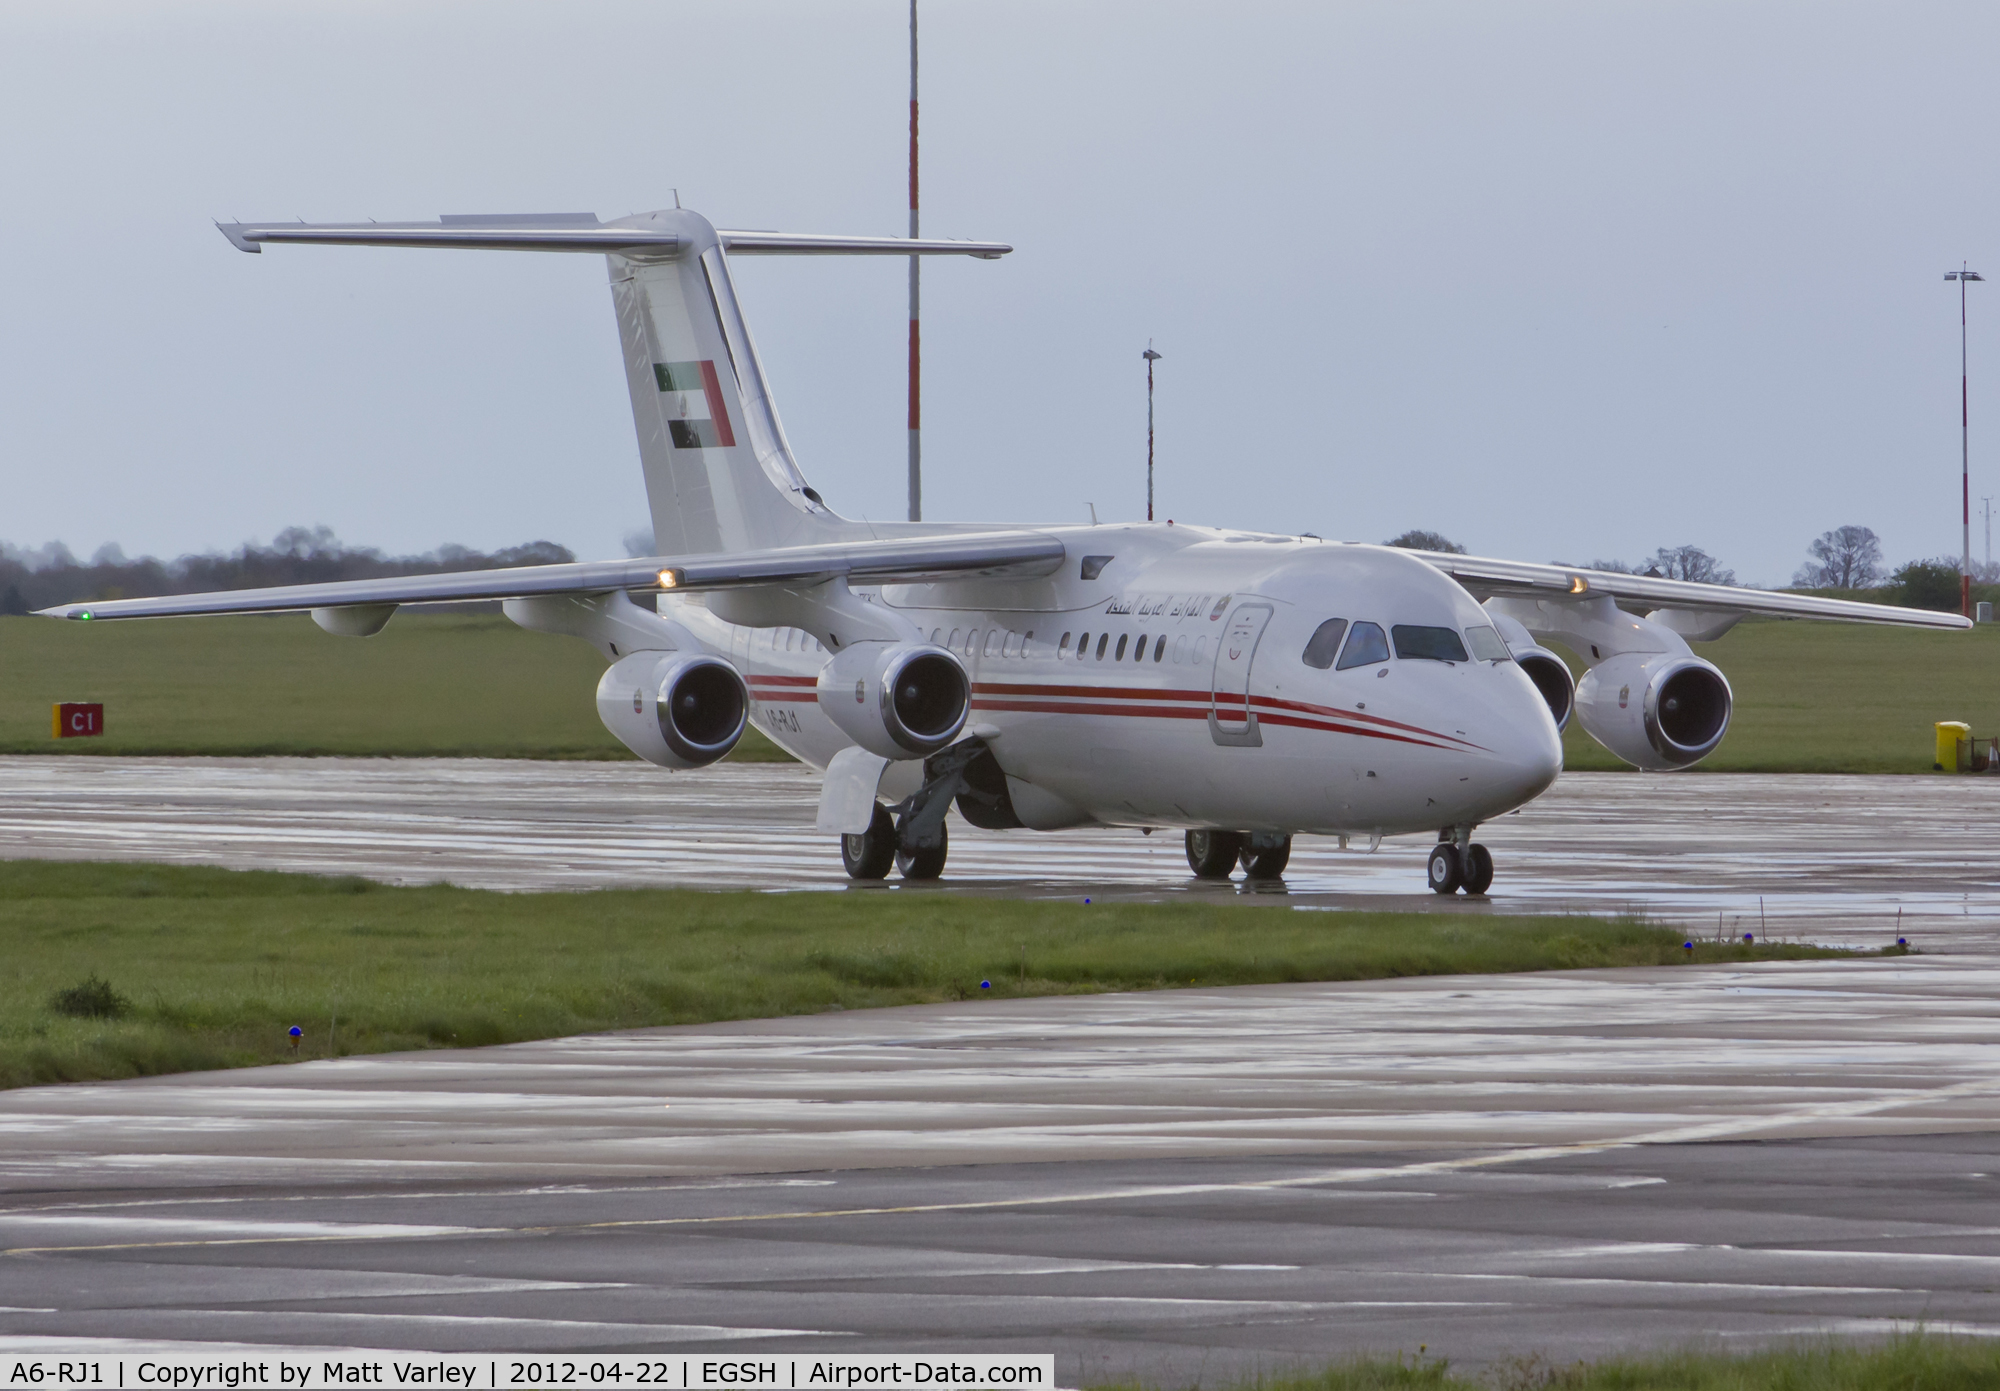 A6-RJ1, 1998 British Aerospace Avro 146-RJ85A C/N E2323, Taxiing to stand 6 for KLM Engineering.